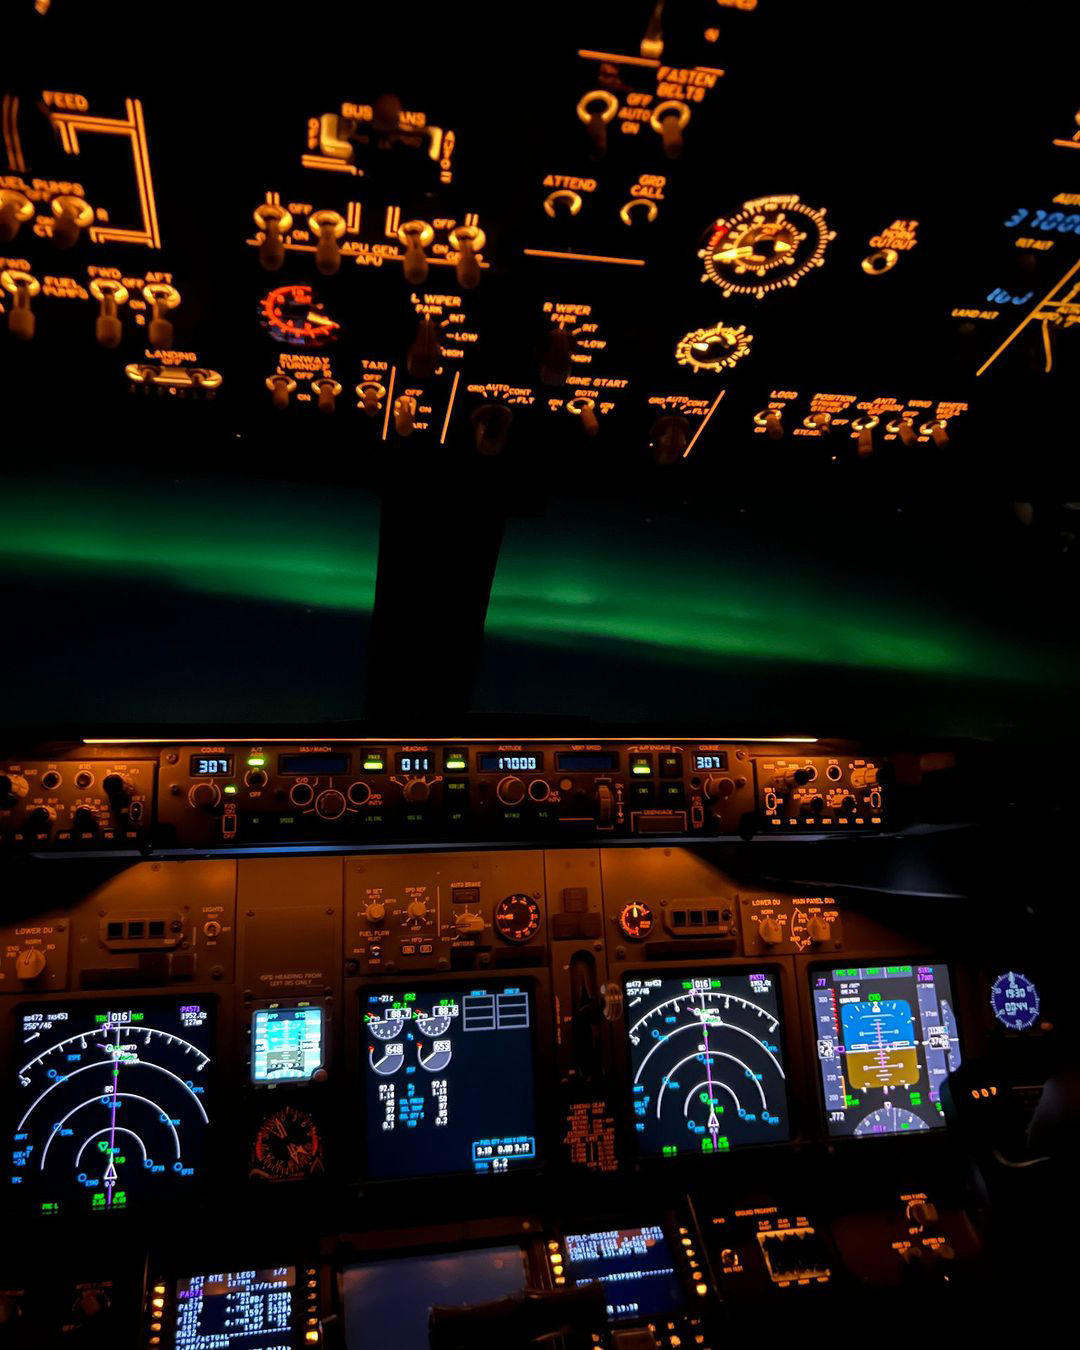 Just when you thought flying couldn't get any more magical, one of our crew on board captured the st